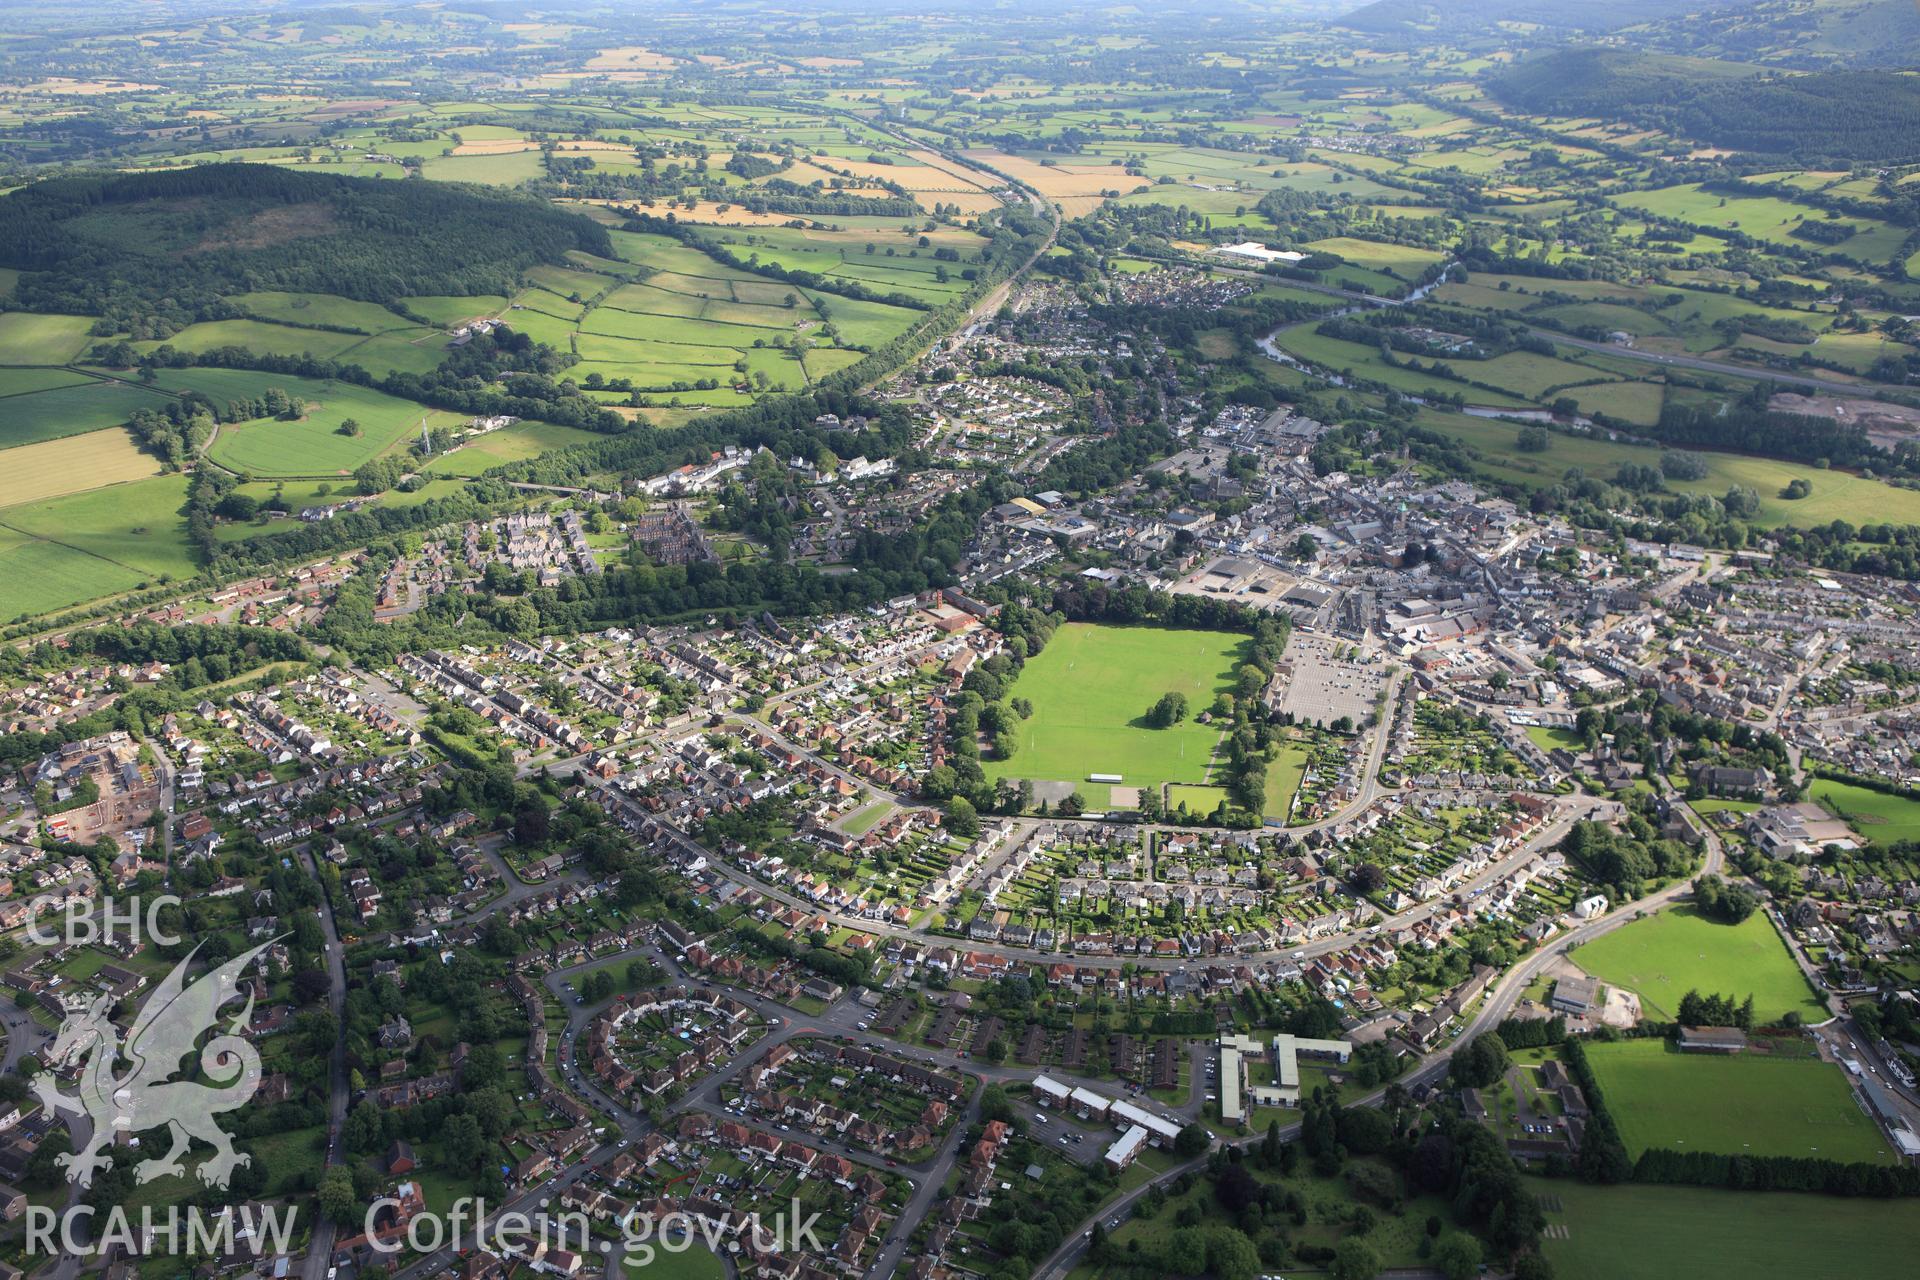 RCAHMW colour oblique aerial photograph of Abergavenny. Taken on 23 July 2009 by Toby Driver